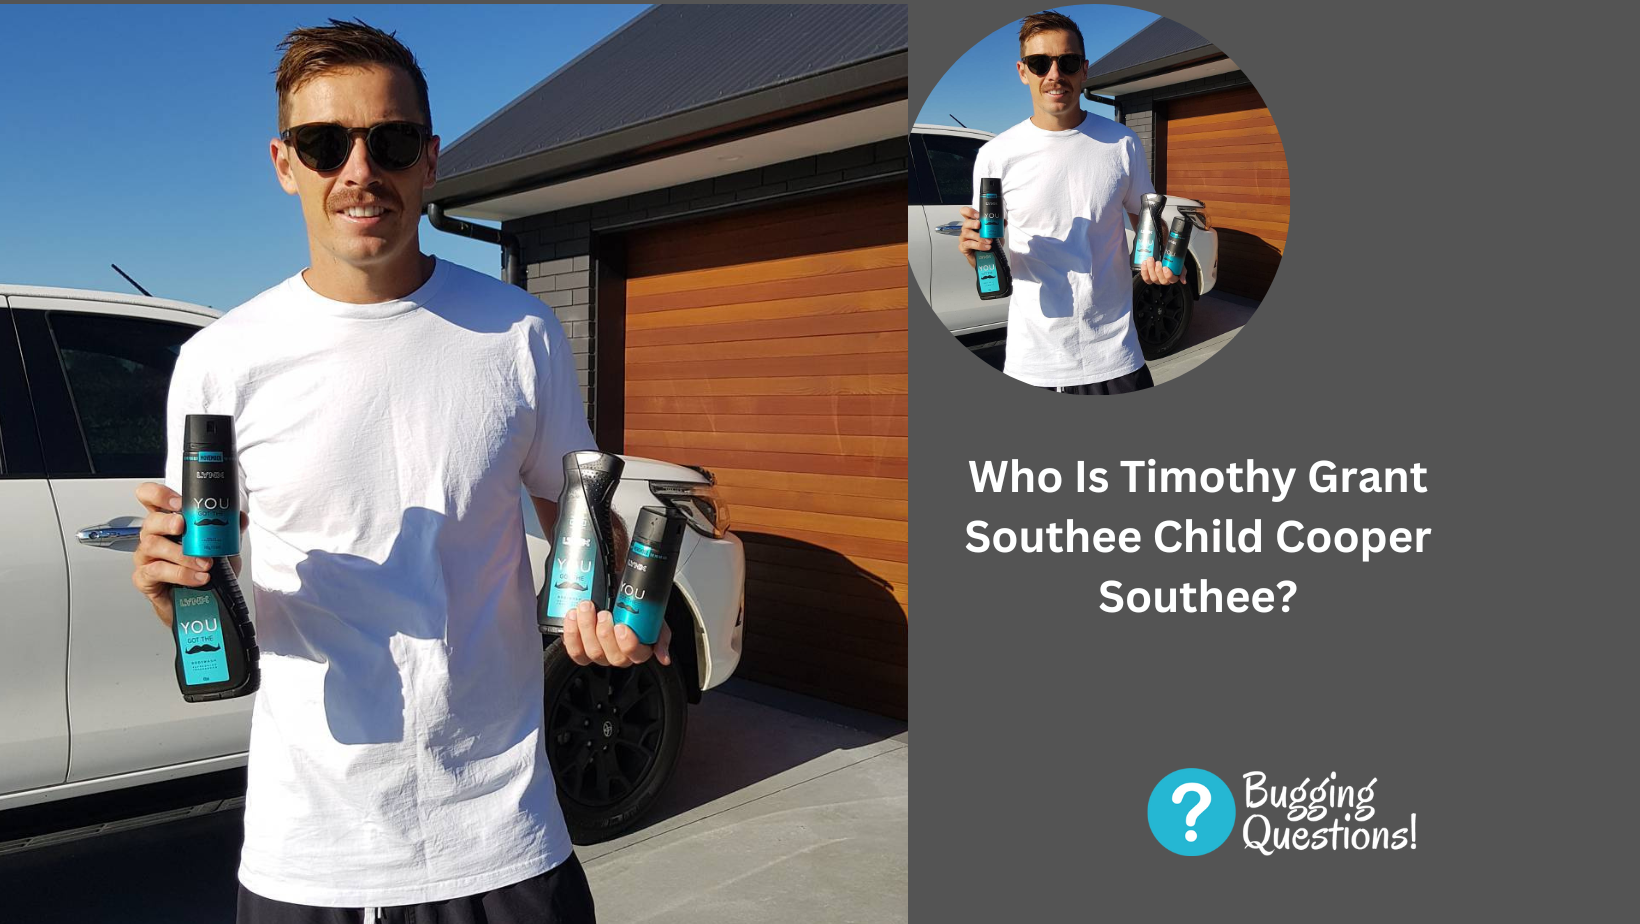 Who Is Timothy Grant Southee Child Cooper Southee?